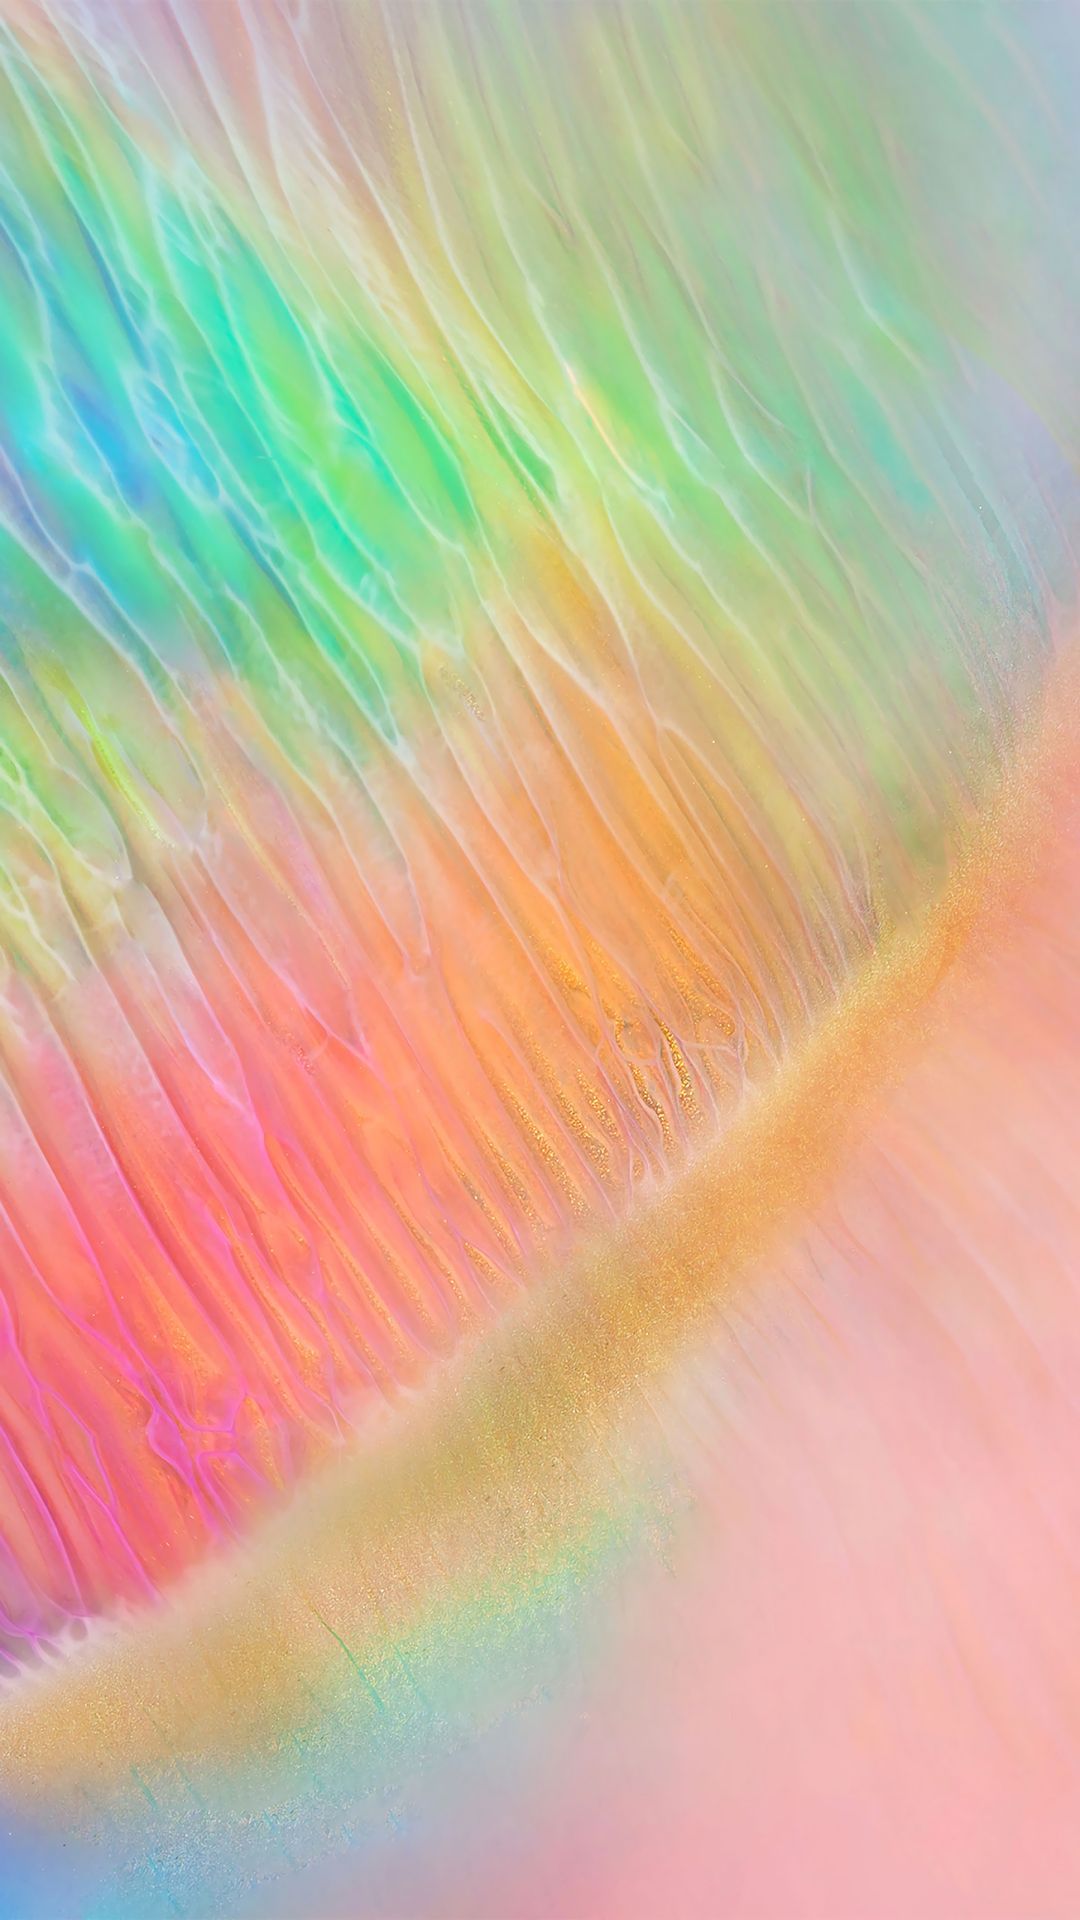 A close up of an abstract image with colorful lines - Phone, pink phone, colorful